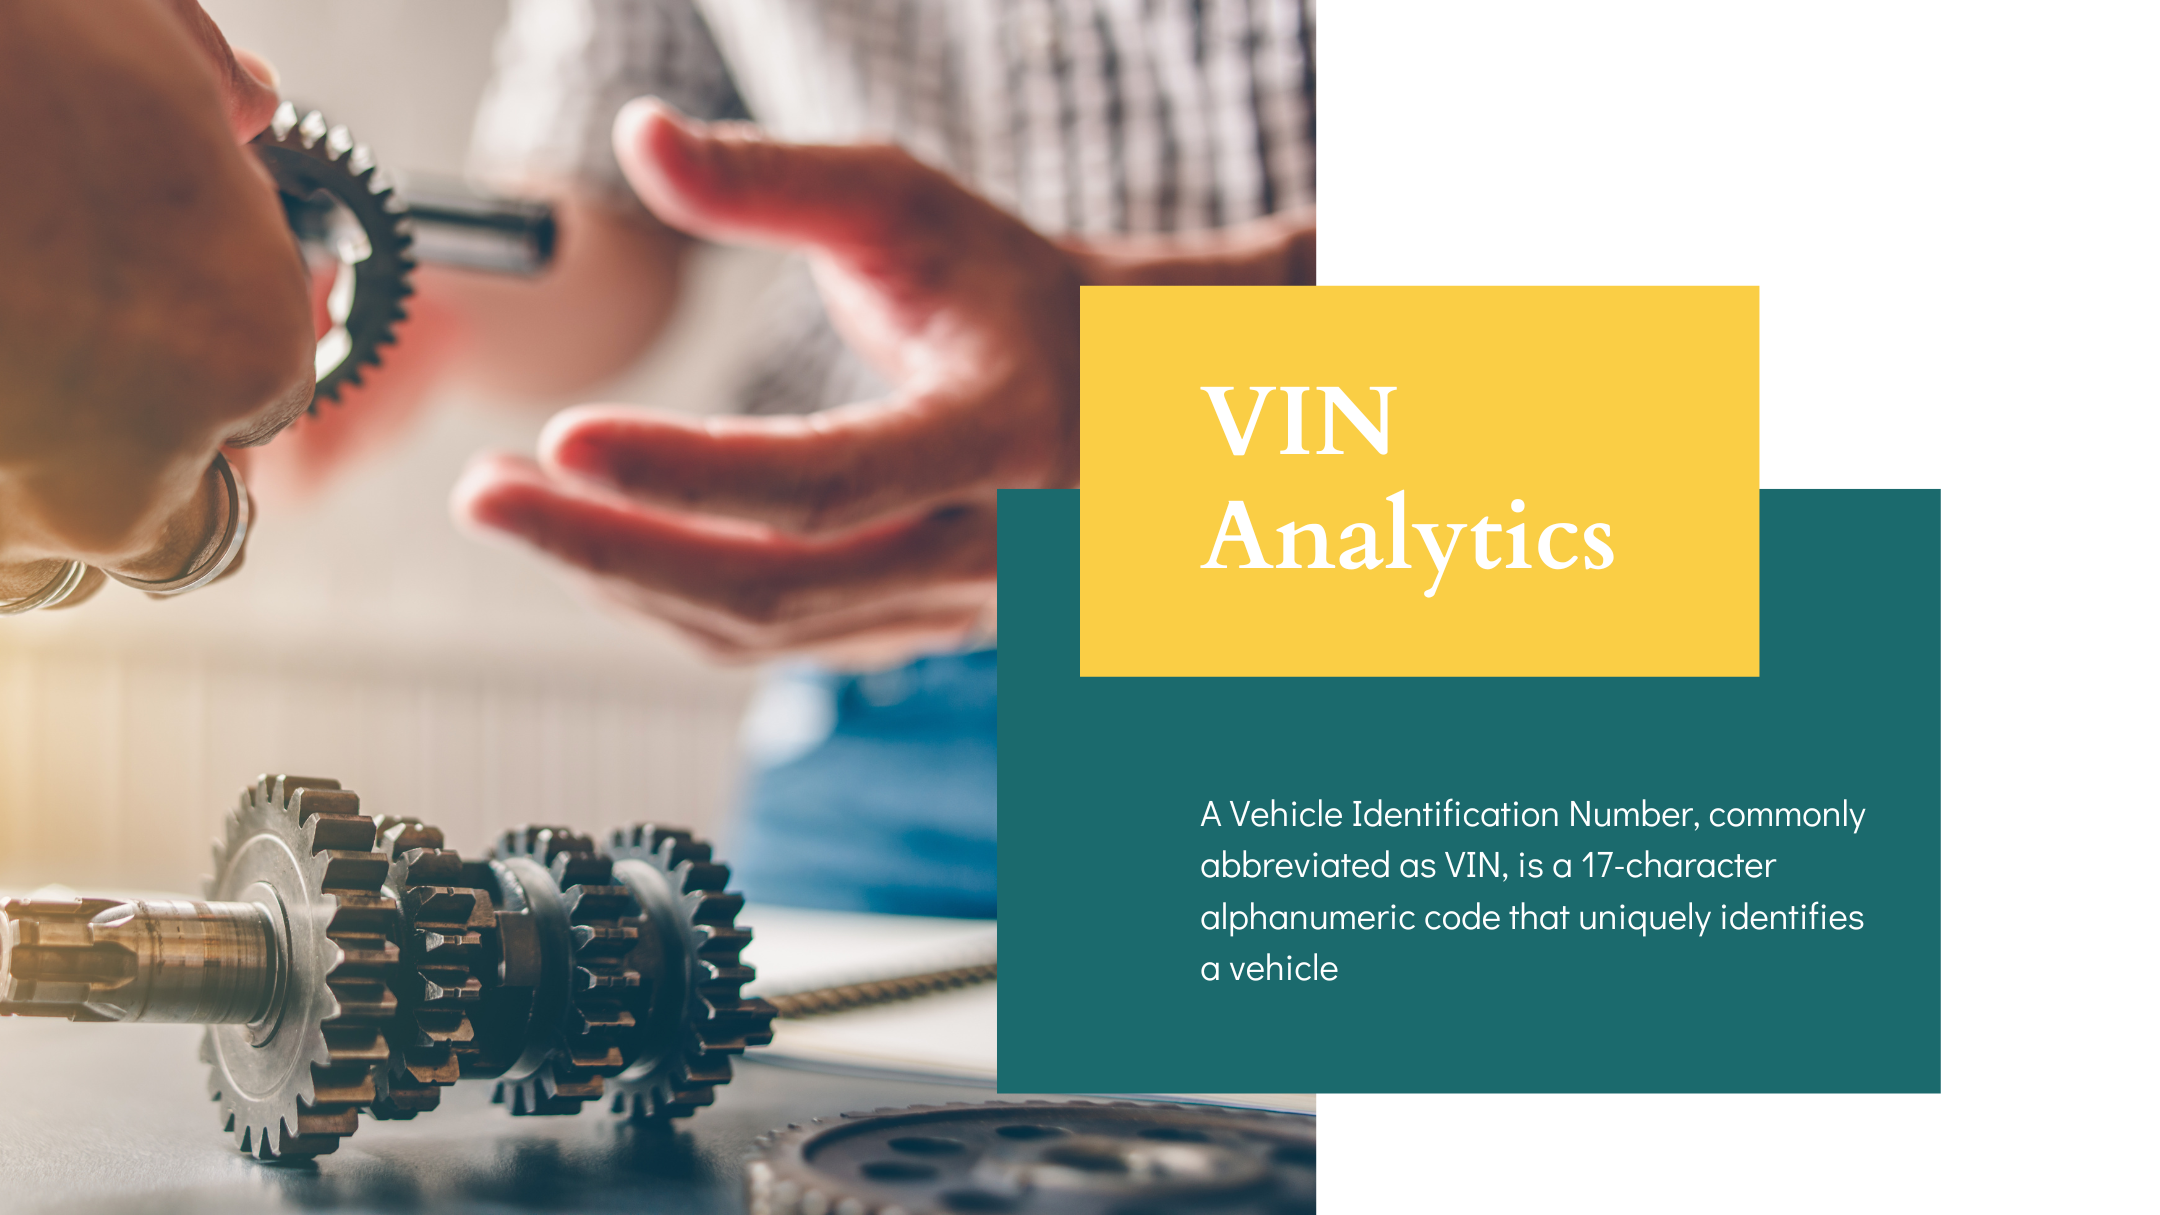 VIN Analytics Meaning